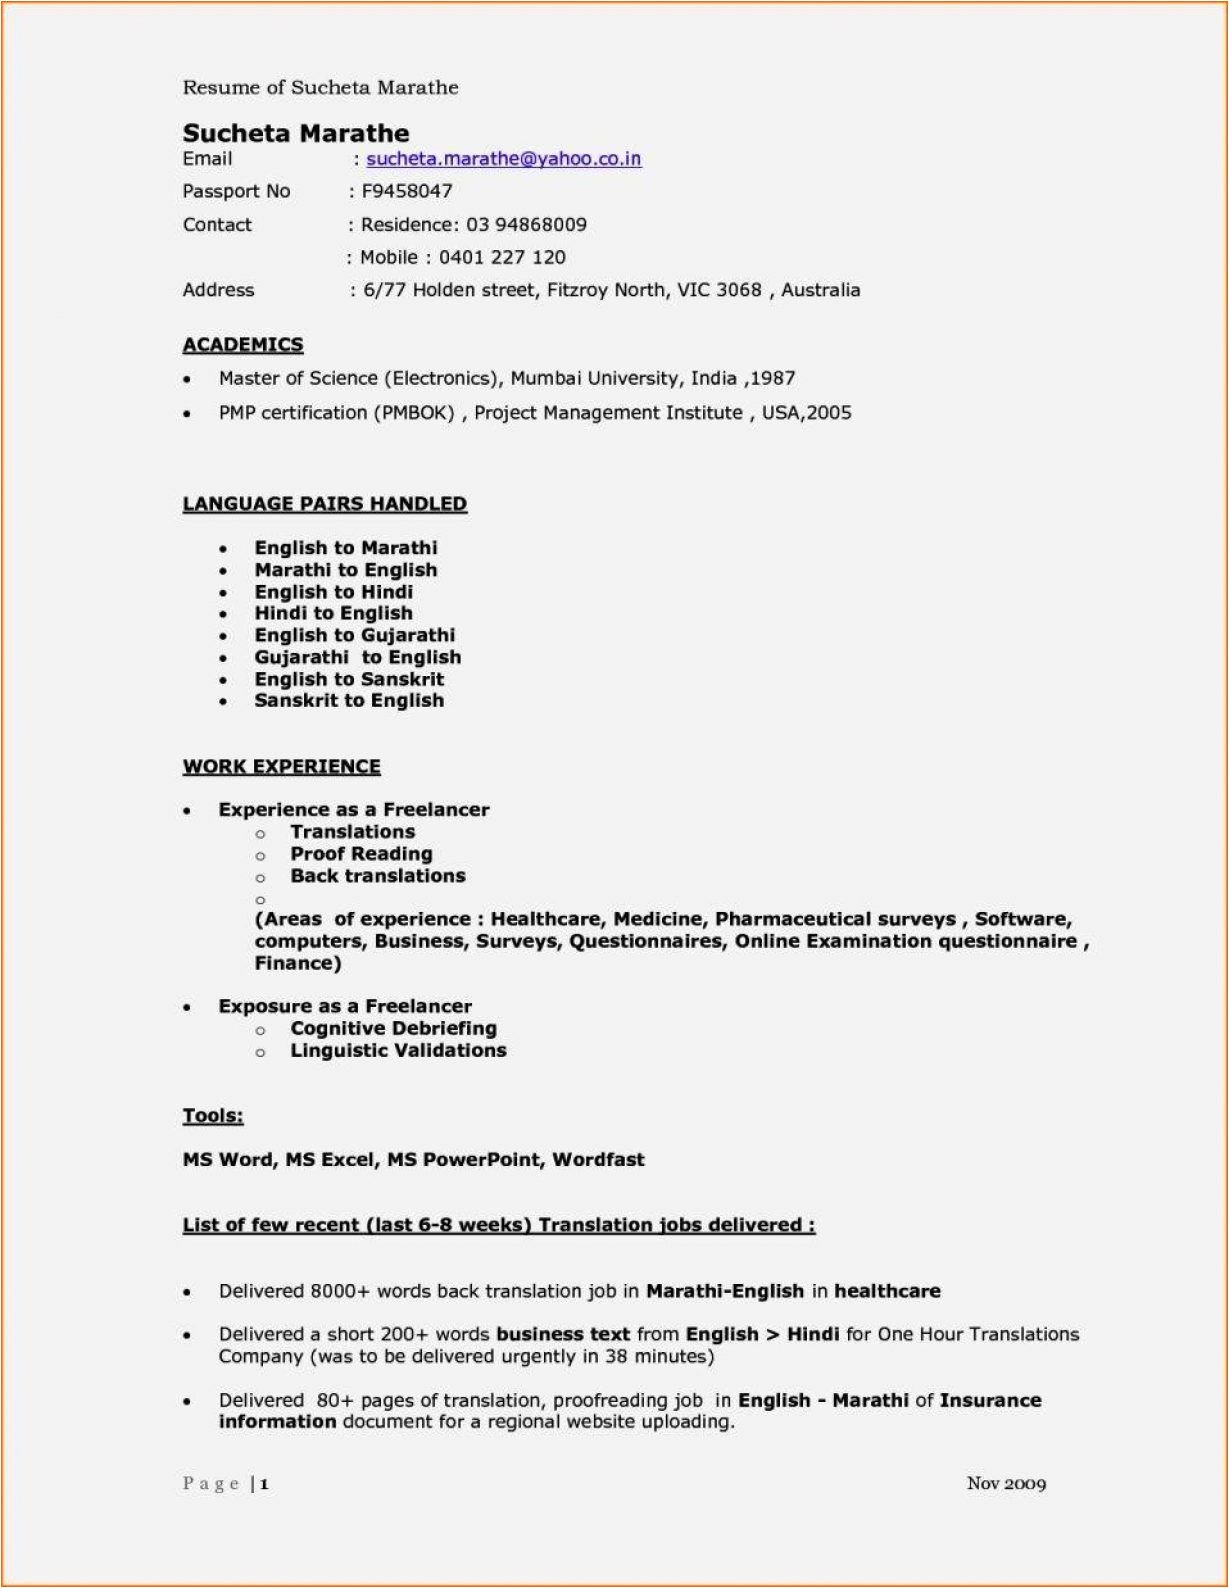 Basic Resume for A 16 Year Old